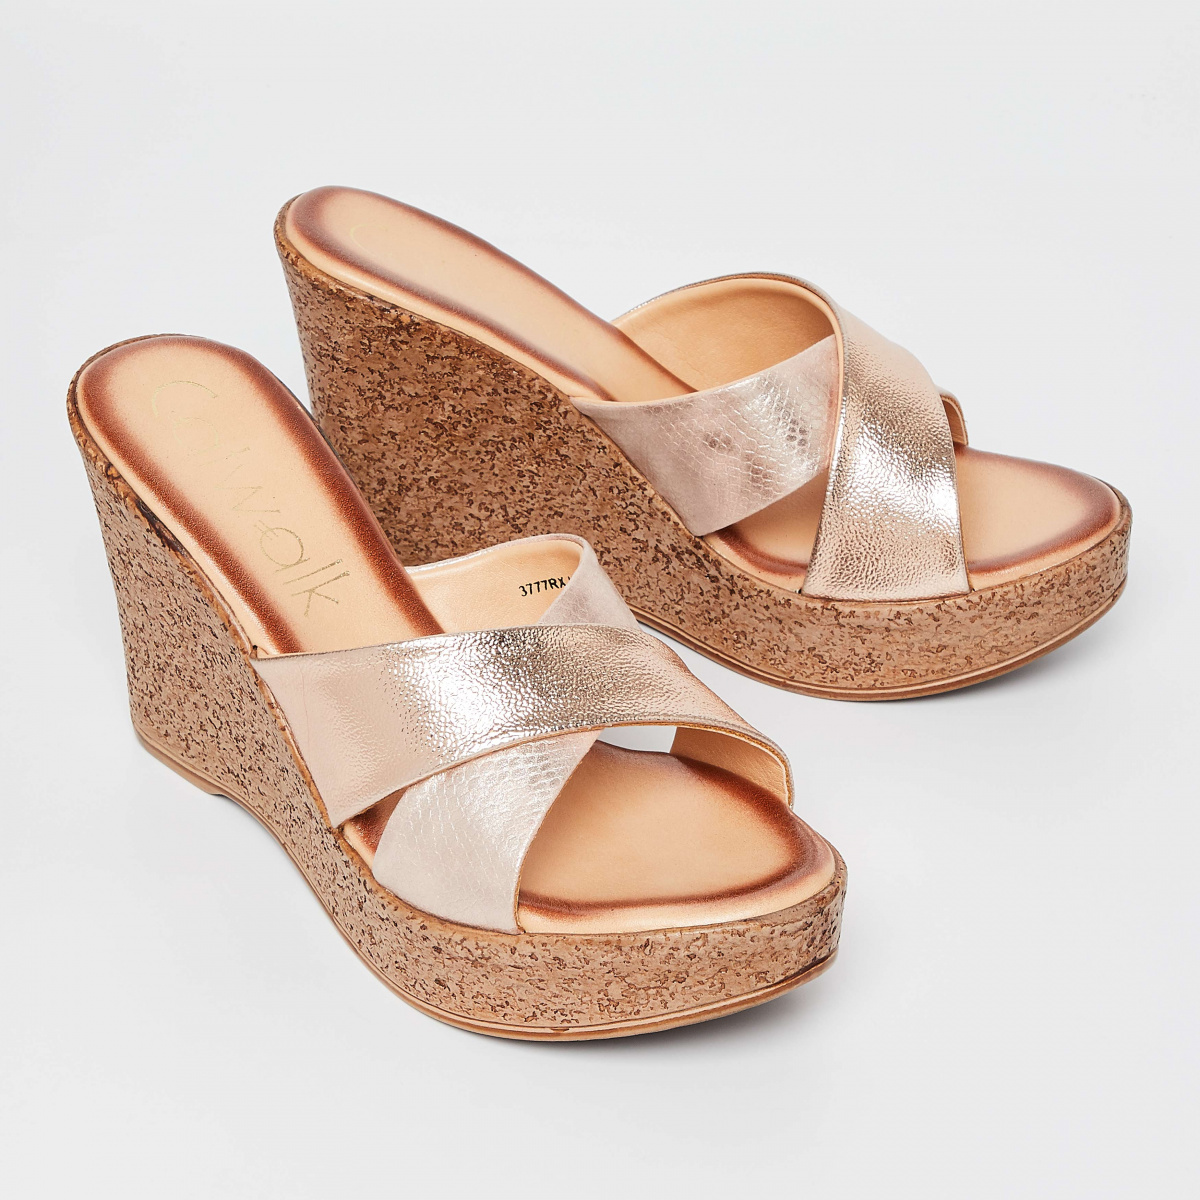 CATWALK Shimmery Textured Cross-Strap Wedges